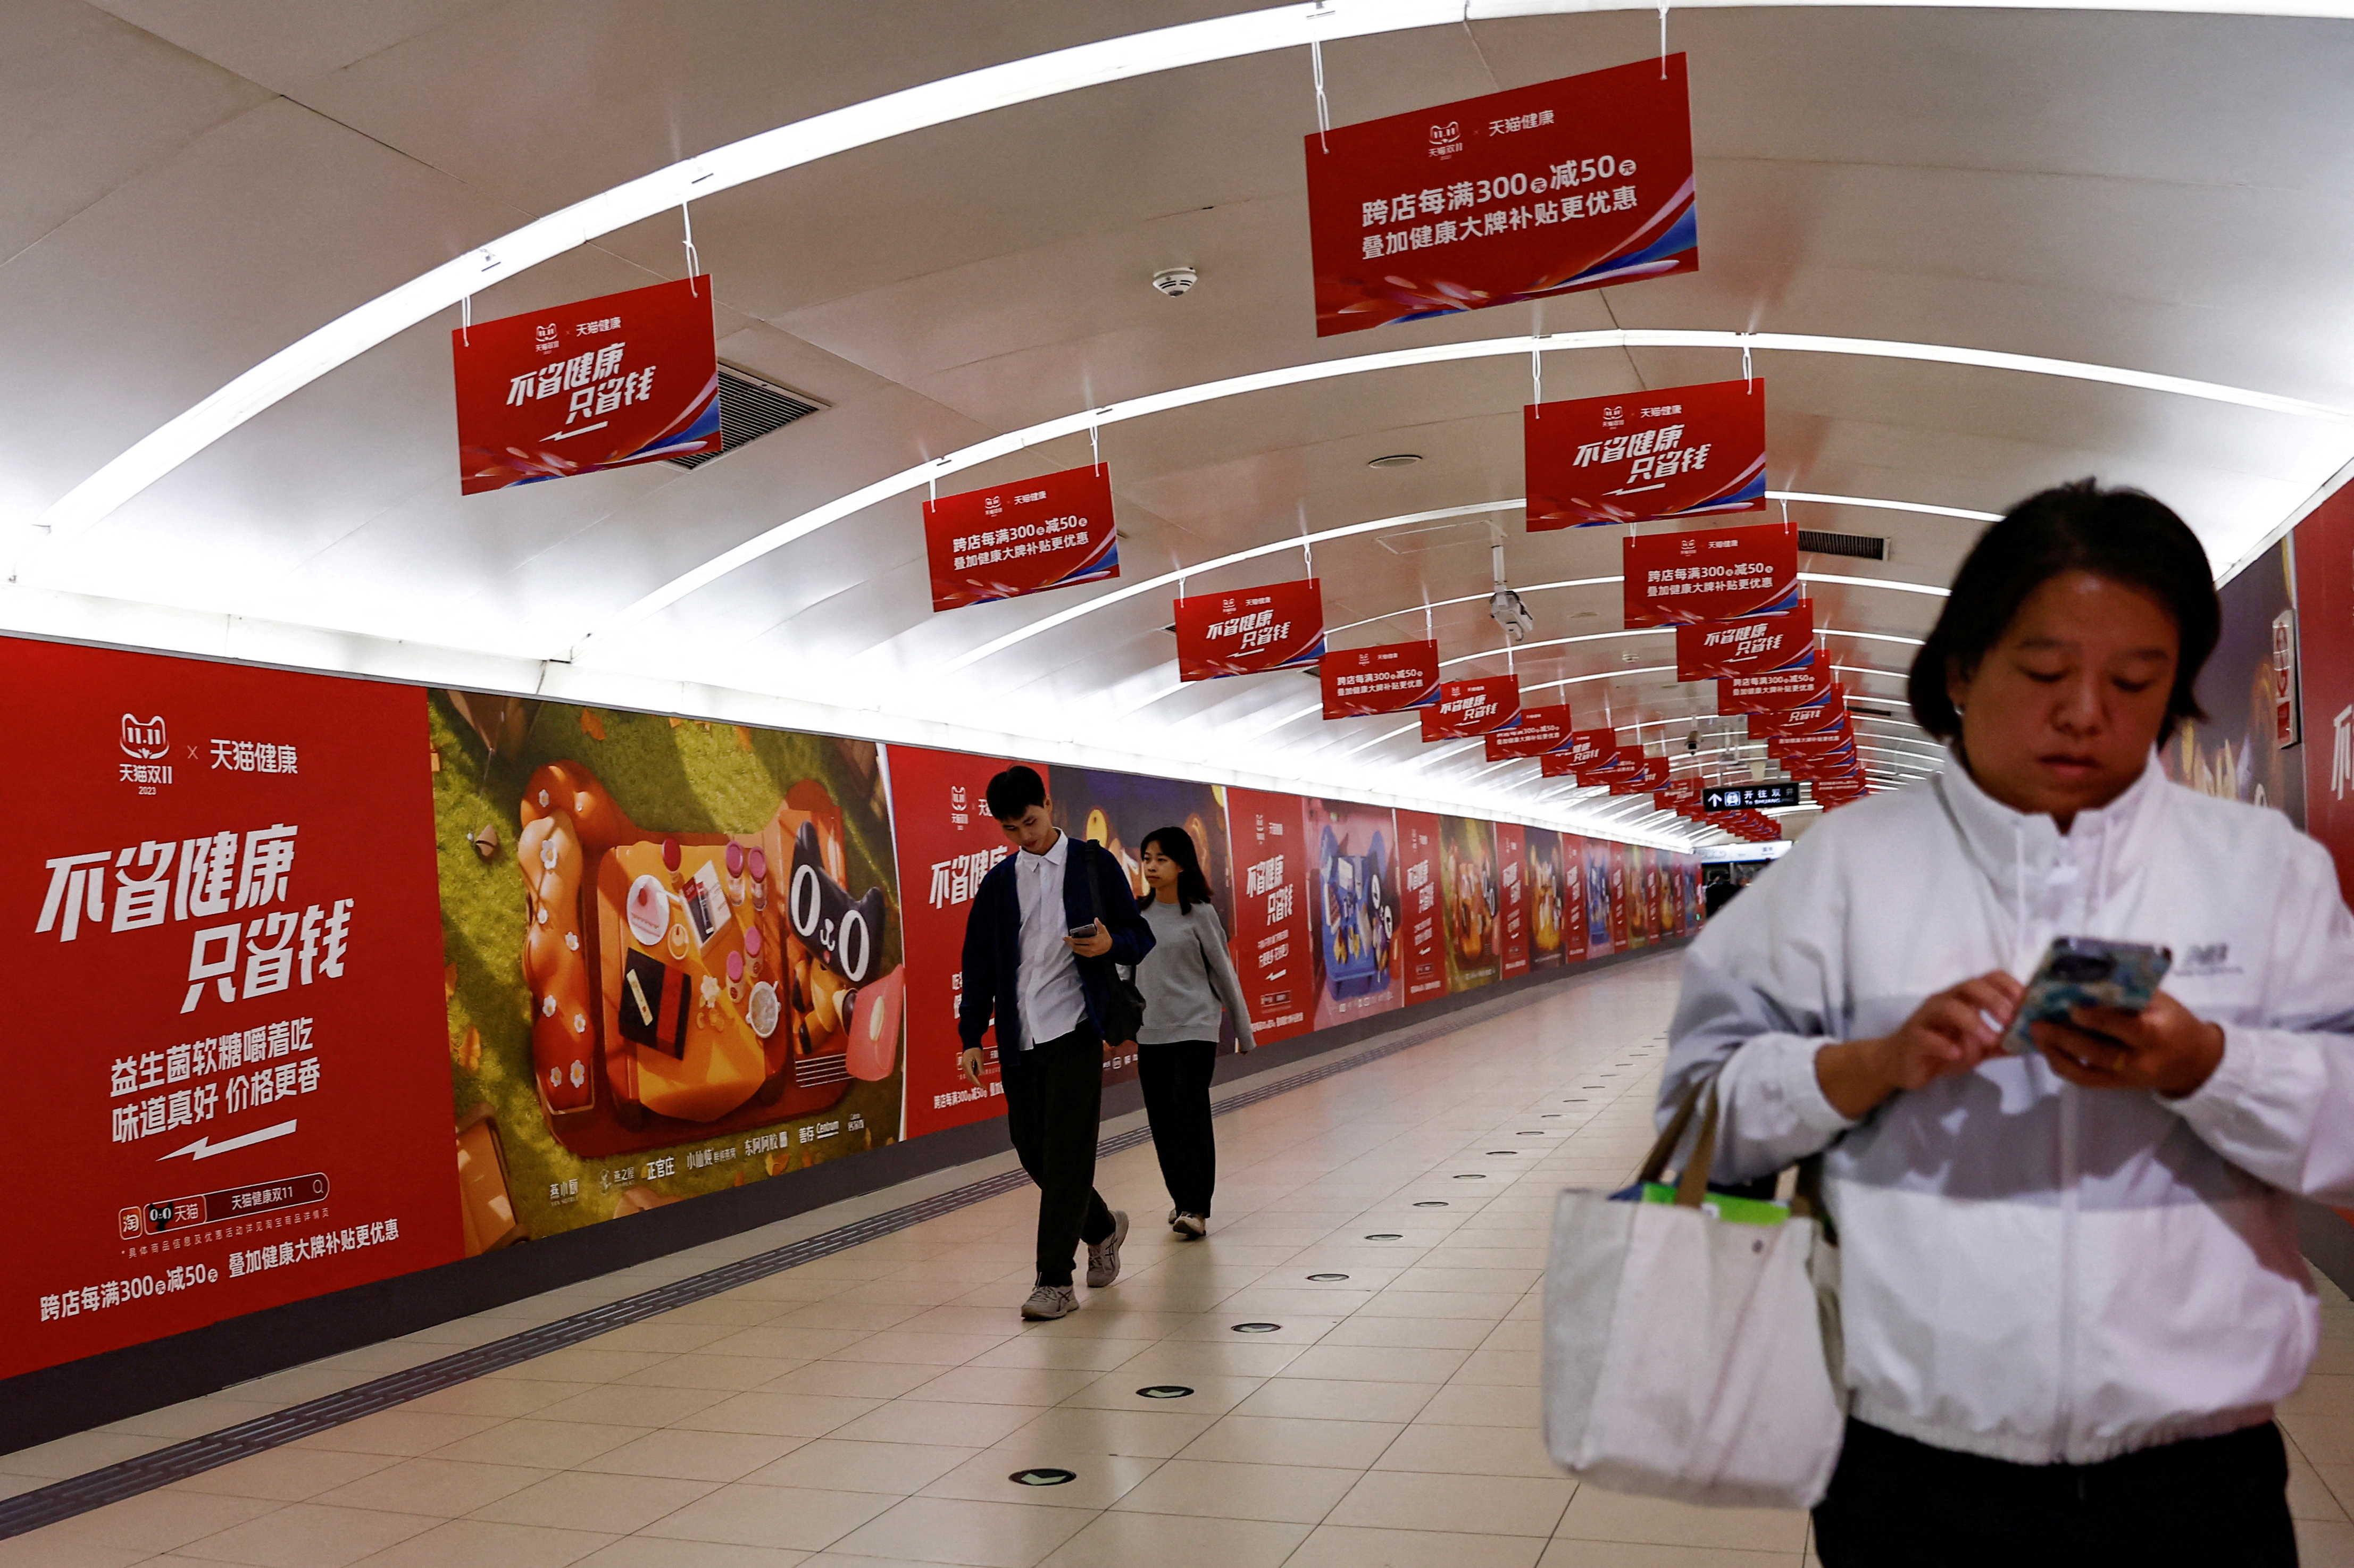 People walk past an Alibaba's advertisement promoting Singles Day shopping festival, in Beijing